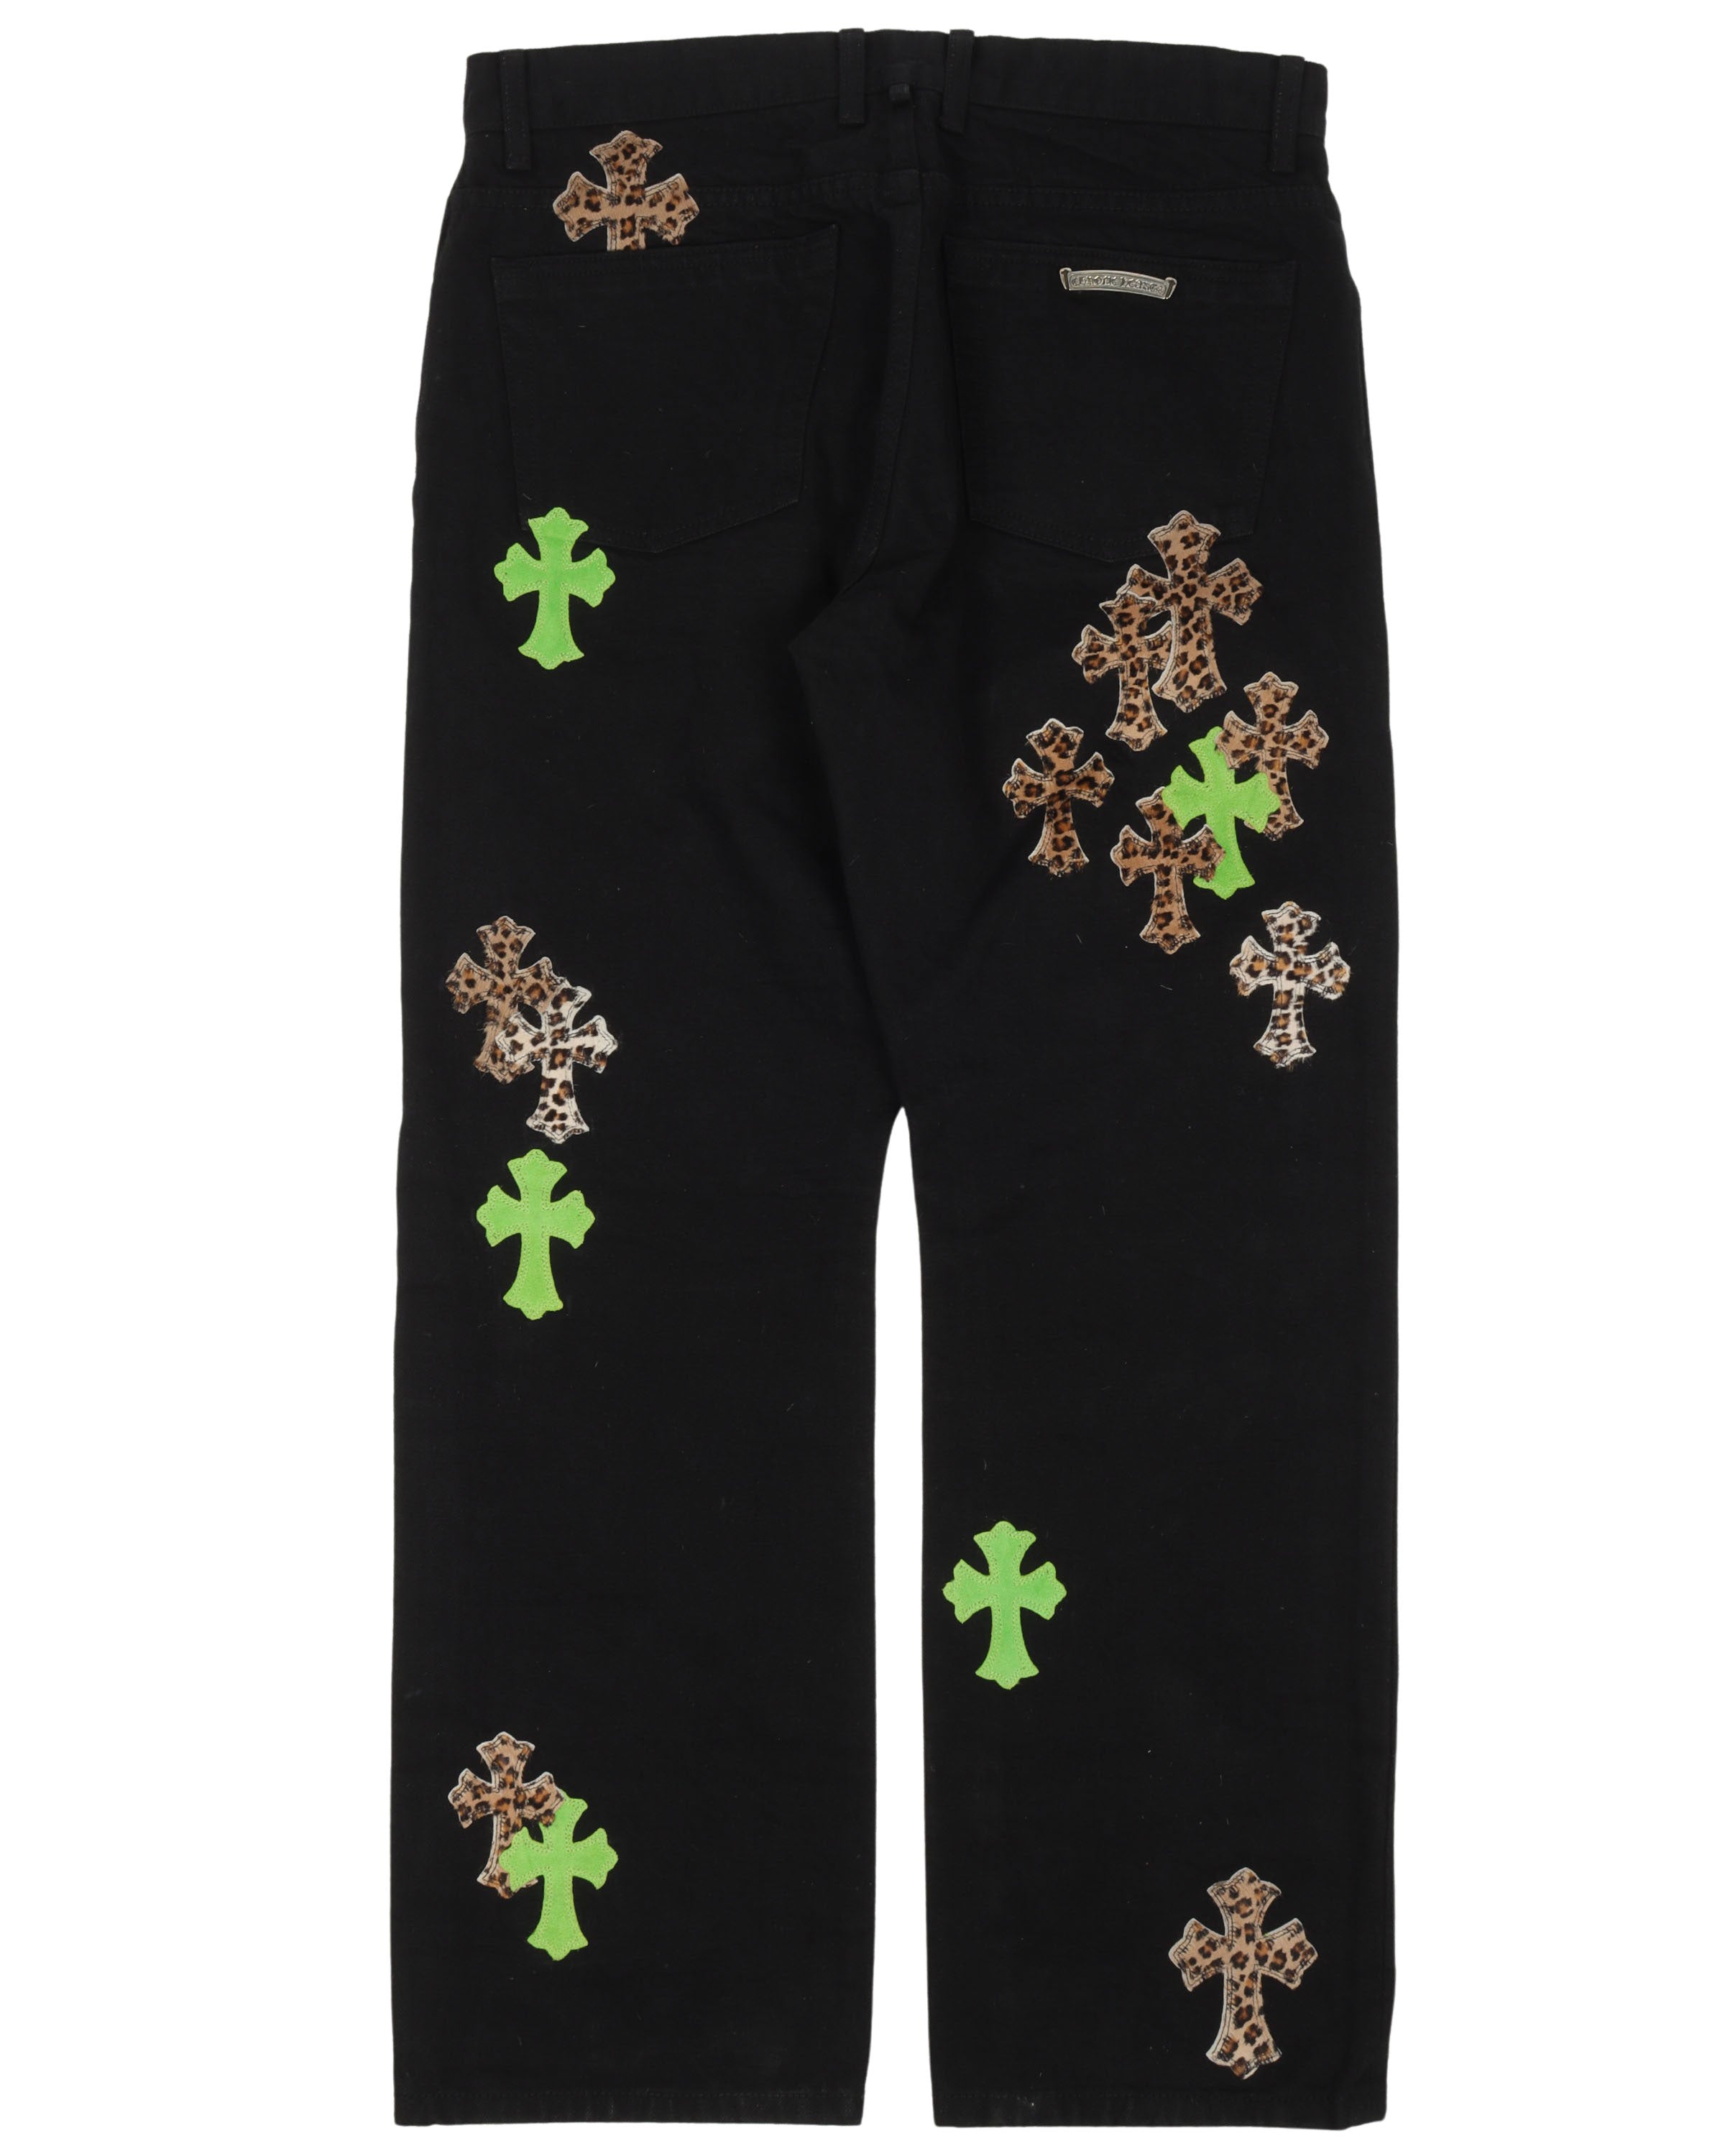 Cheetah Cross Patch Jeans w/ 35 Cross Patches